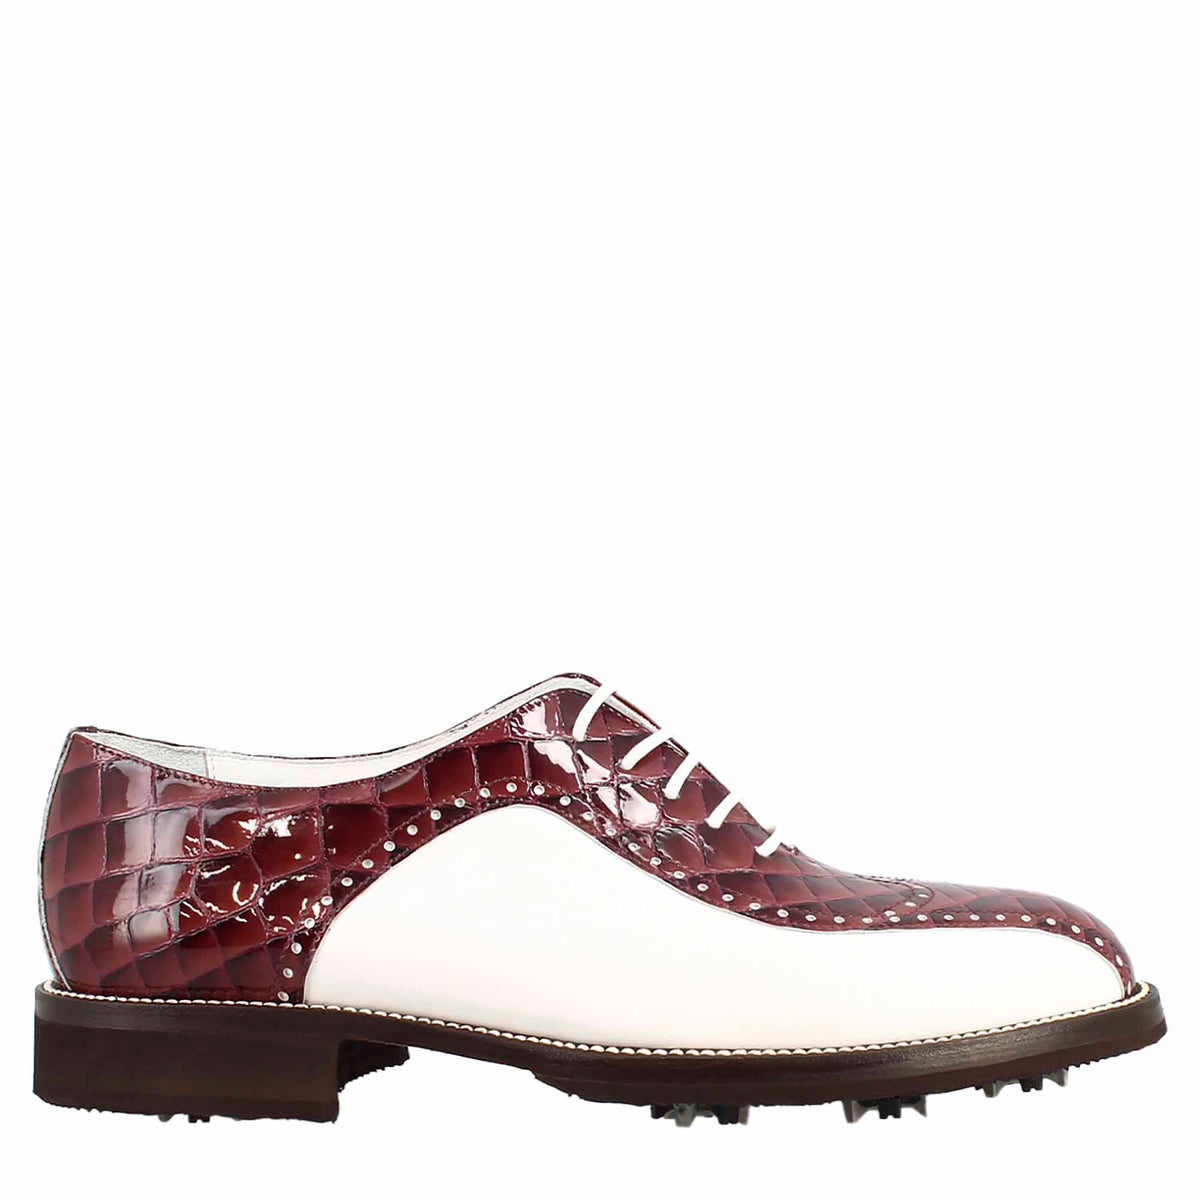 Handcrafted white and bordeaux coconut leather men's golf shoes